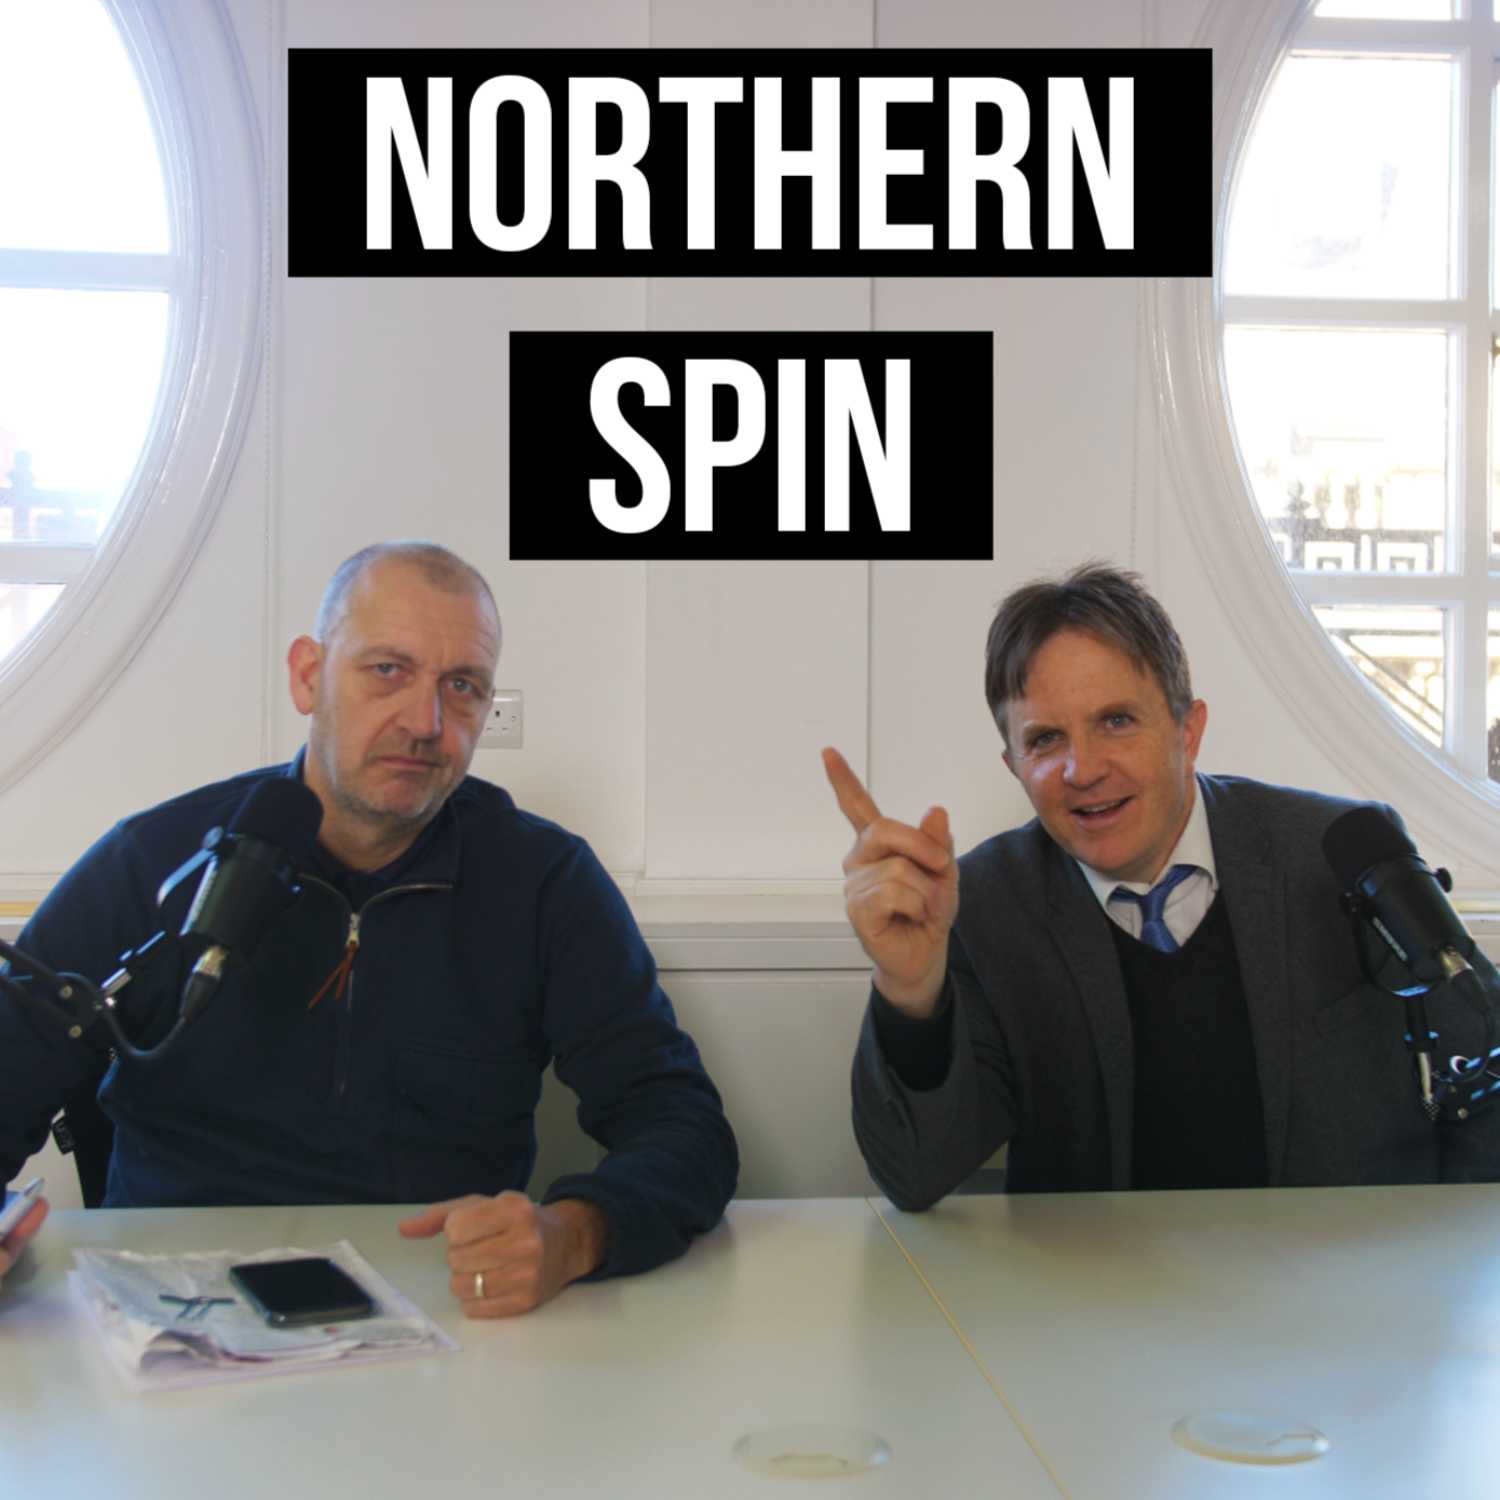 Northern Spin - Season 4 - Episode 7: How The Tories Could Win The Next Election, But Why They Won’t